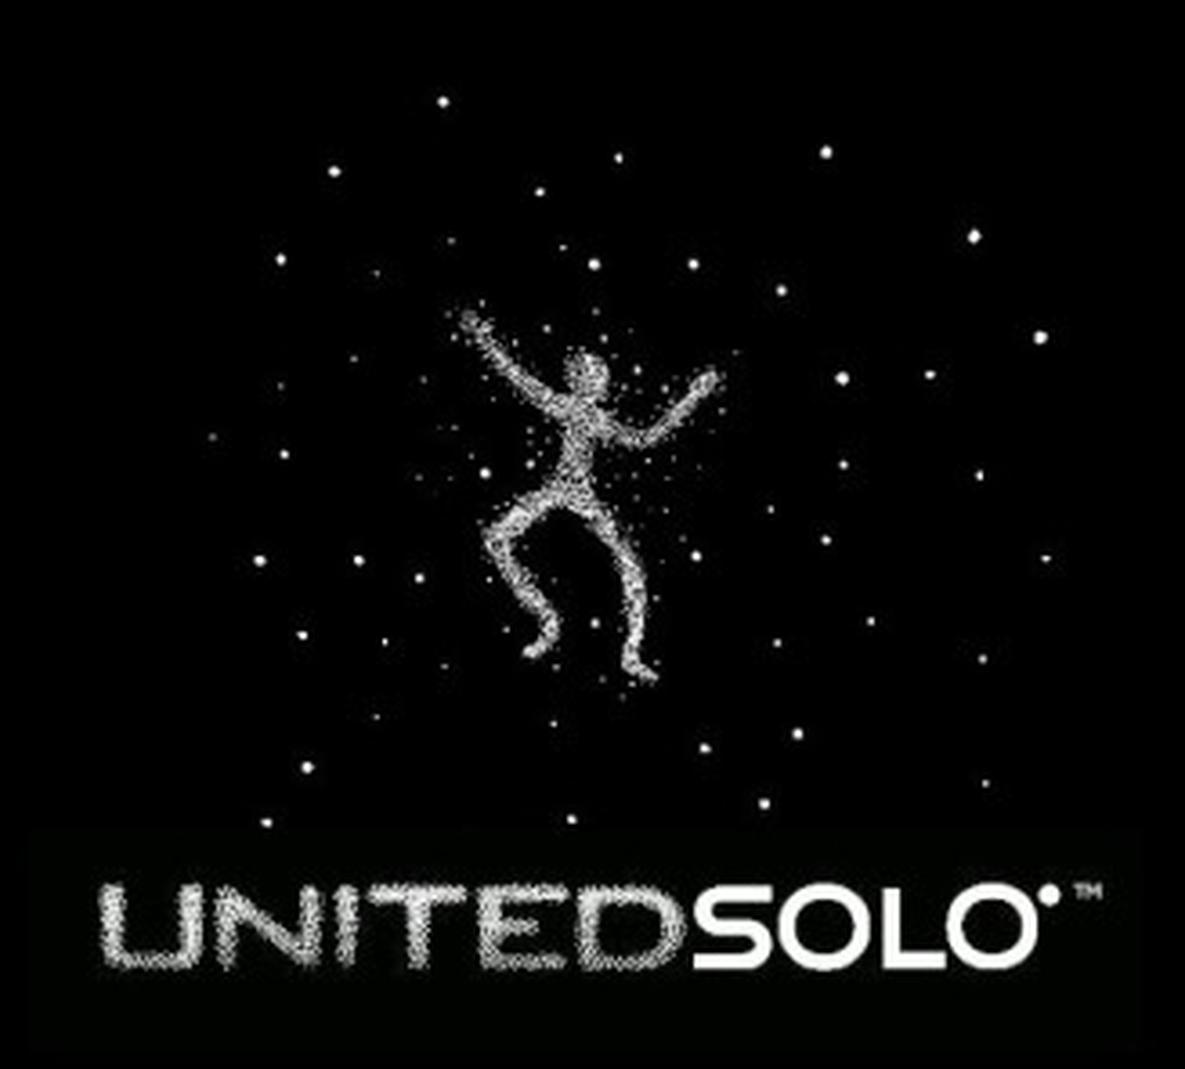 Winners of the 5th Annual United Solo Fest